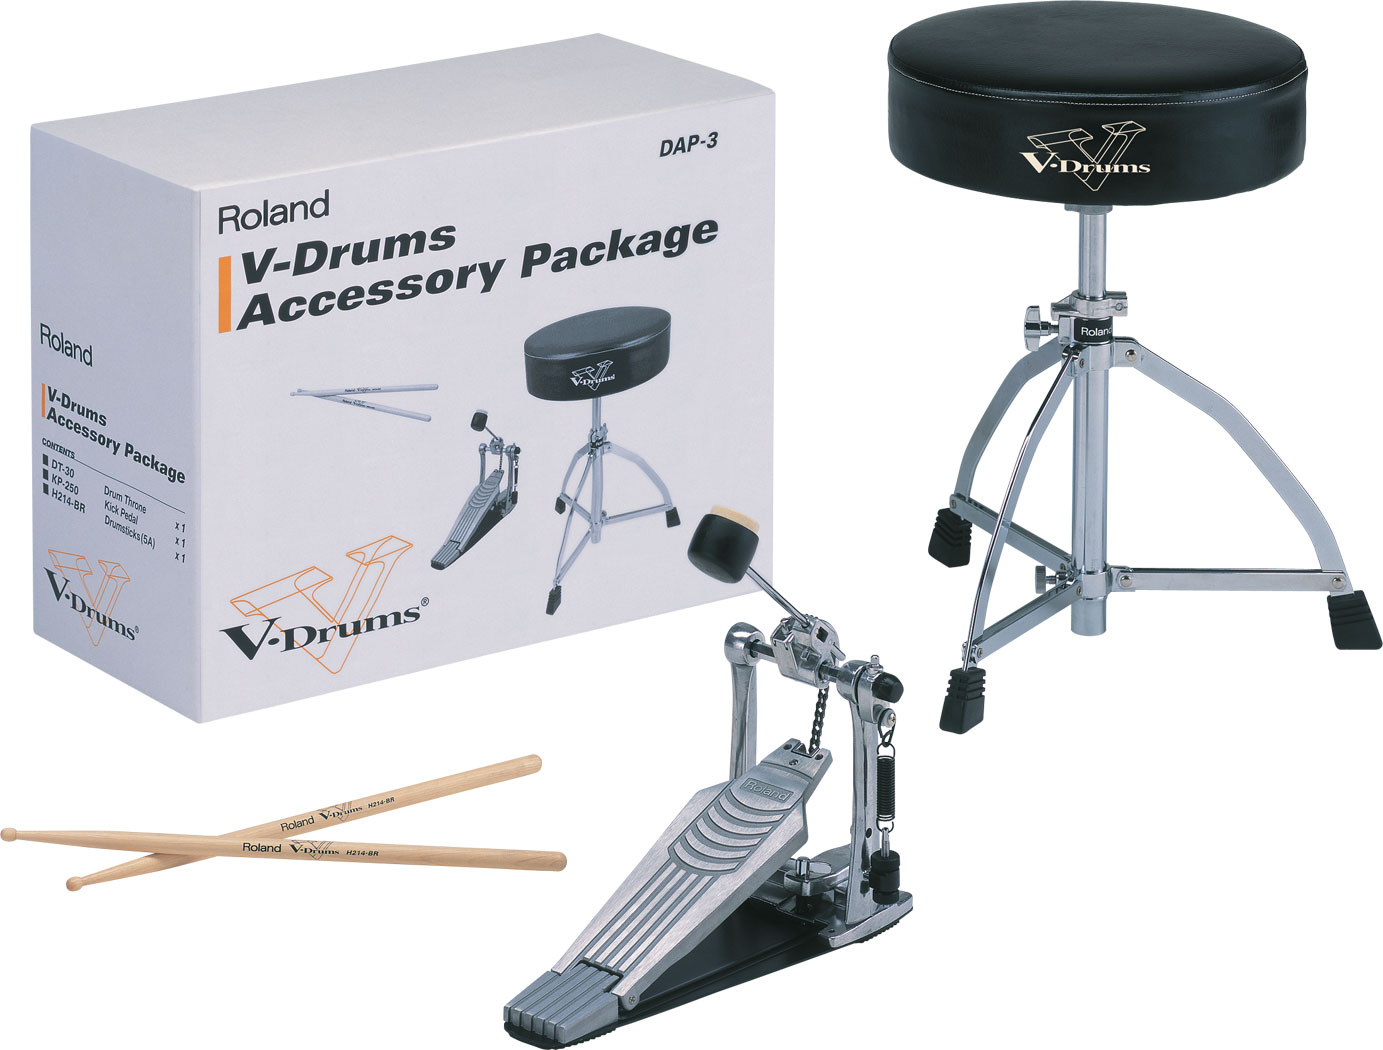 DAP-3 | V-Drums Accessory Package - Roland